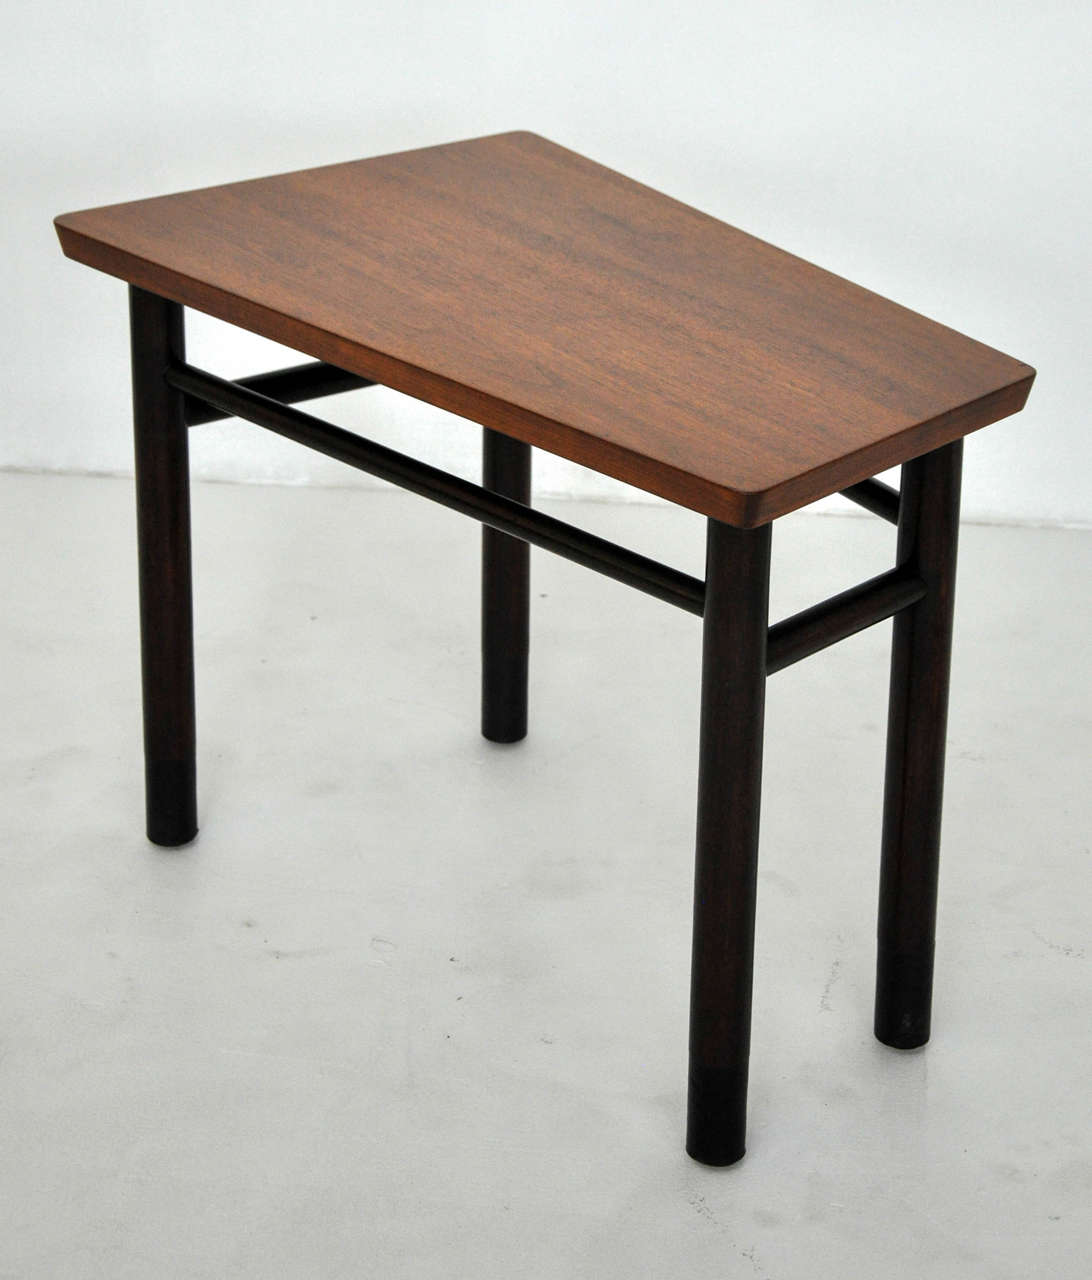 Trapezoid shaped end table designed by Edward Wormley for Dunbar, circa 1950s. Dark mahogany frame with walnut top. Excellent condition, refinished top.